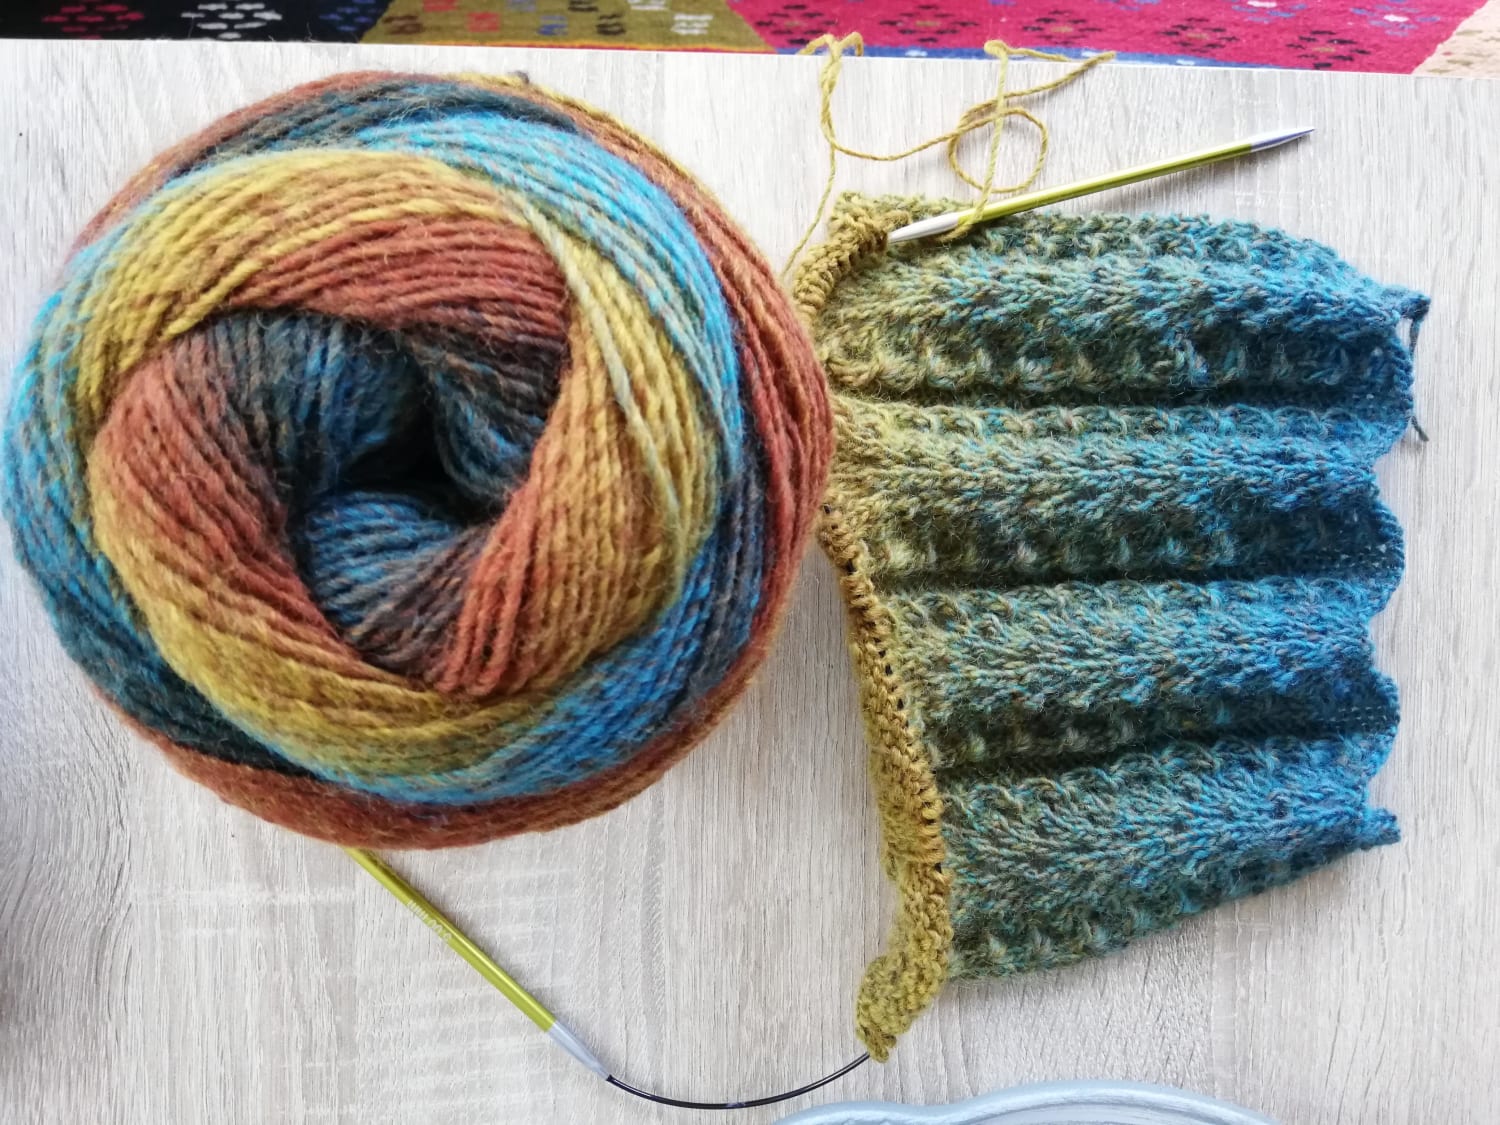 Love the color gradient, can't wait to see the finished scarf